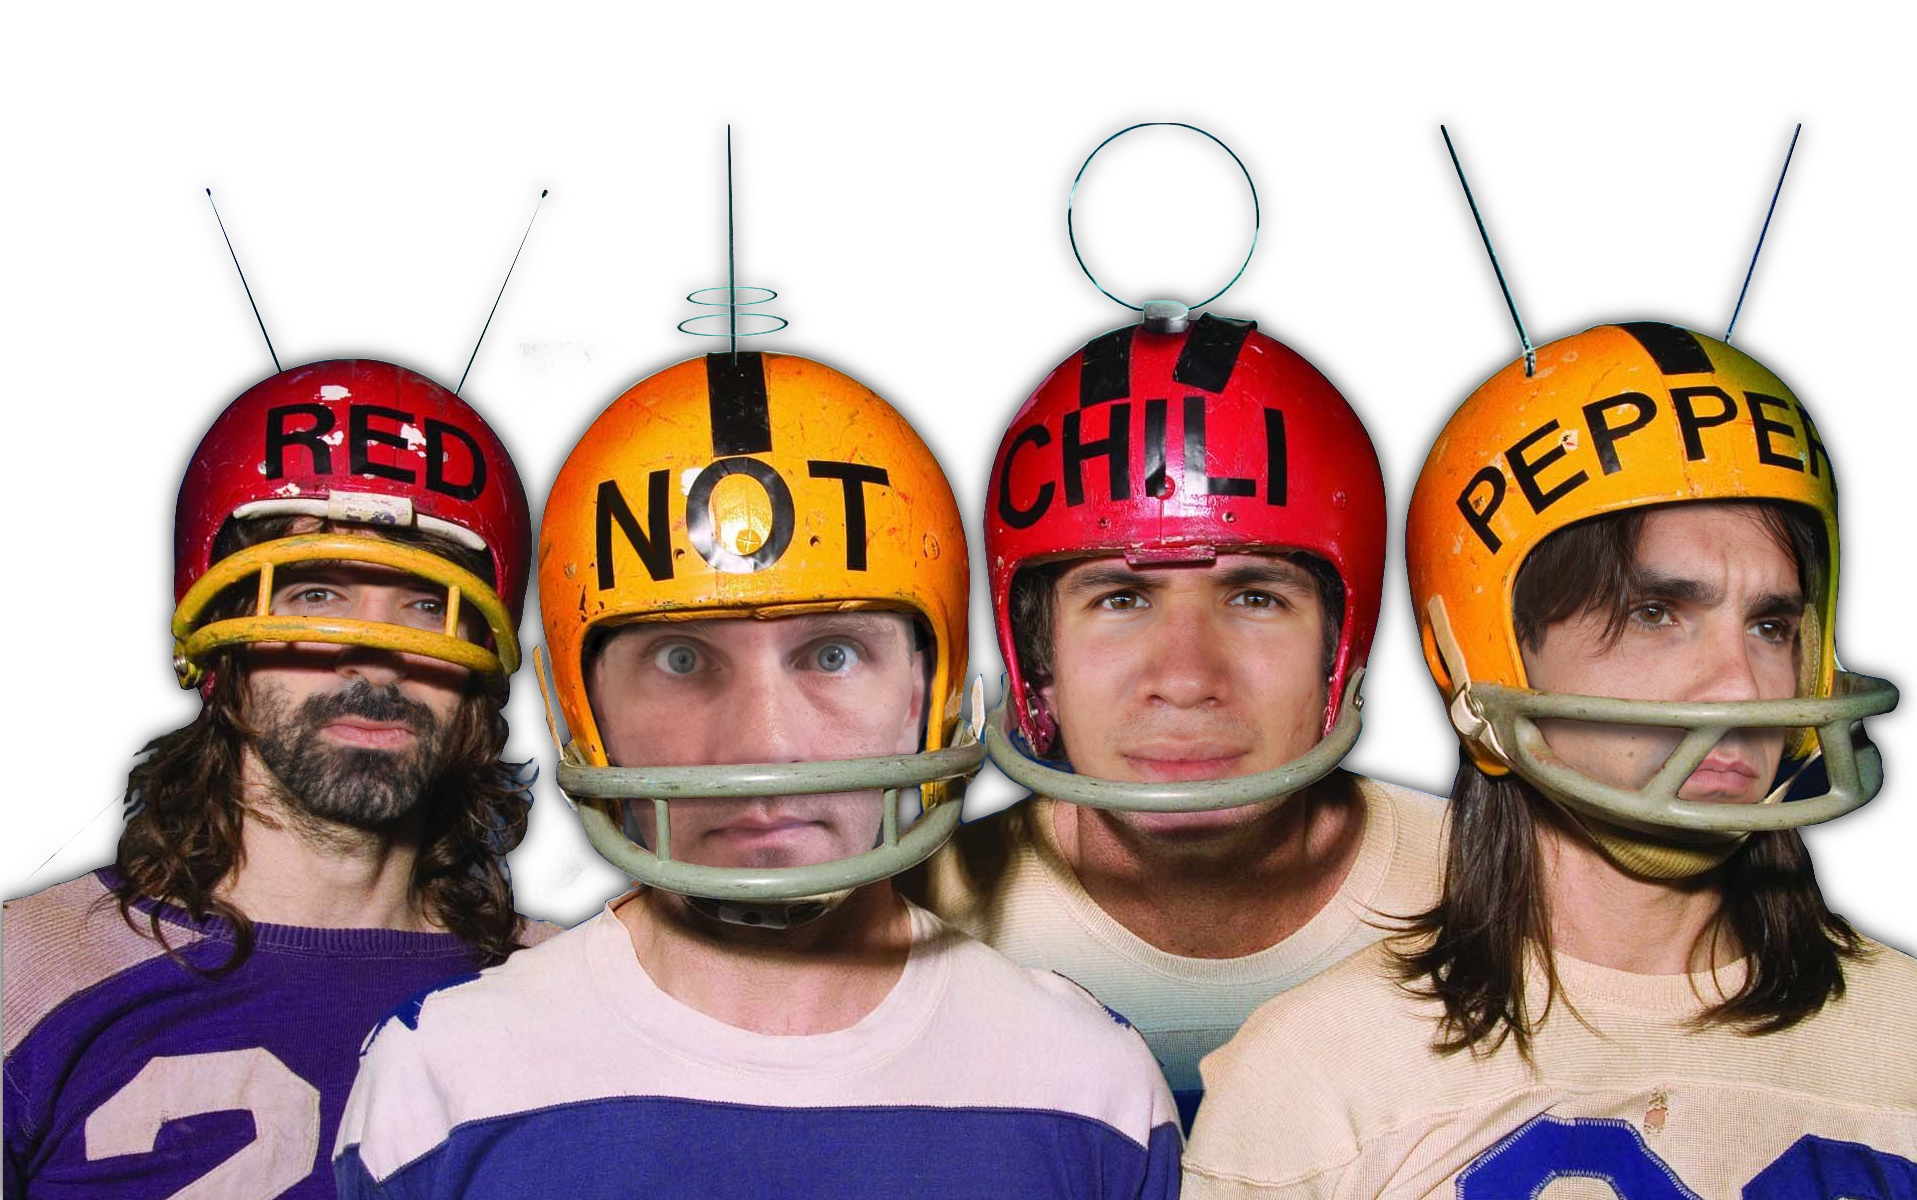 Red hot chili peppers tissue. Ред хот Чили пеперс. Red hot Chili Peppers логотип. Red hot Chili Peppers участники. RHCP Tribute.